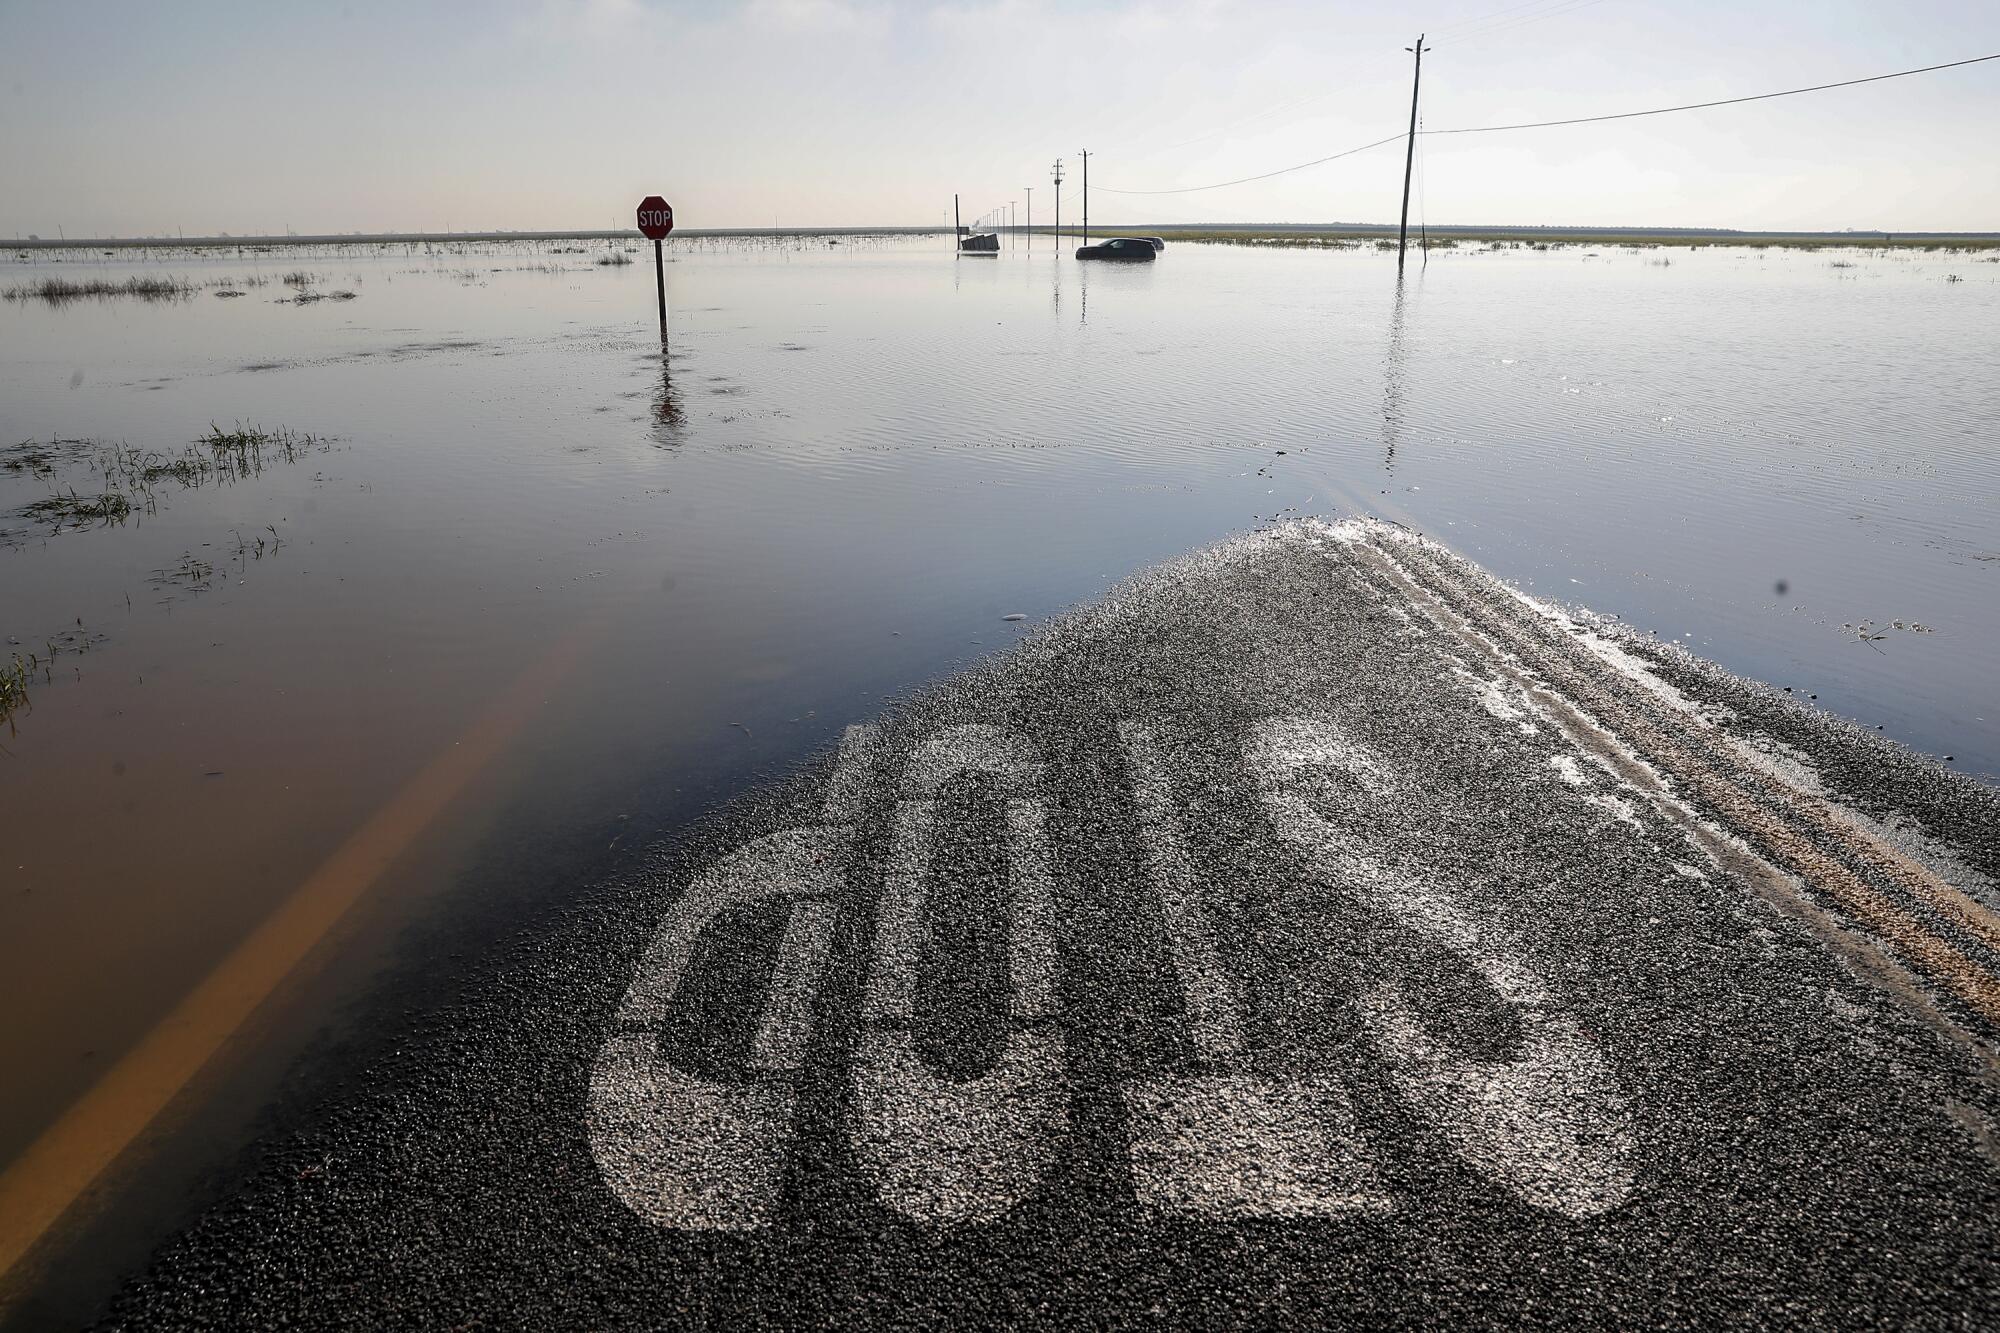 Vehicles sit submerged in floodwaters near the horizon, while a road with a stop sign on it disappears into the water.